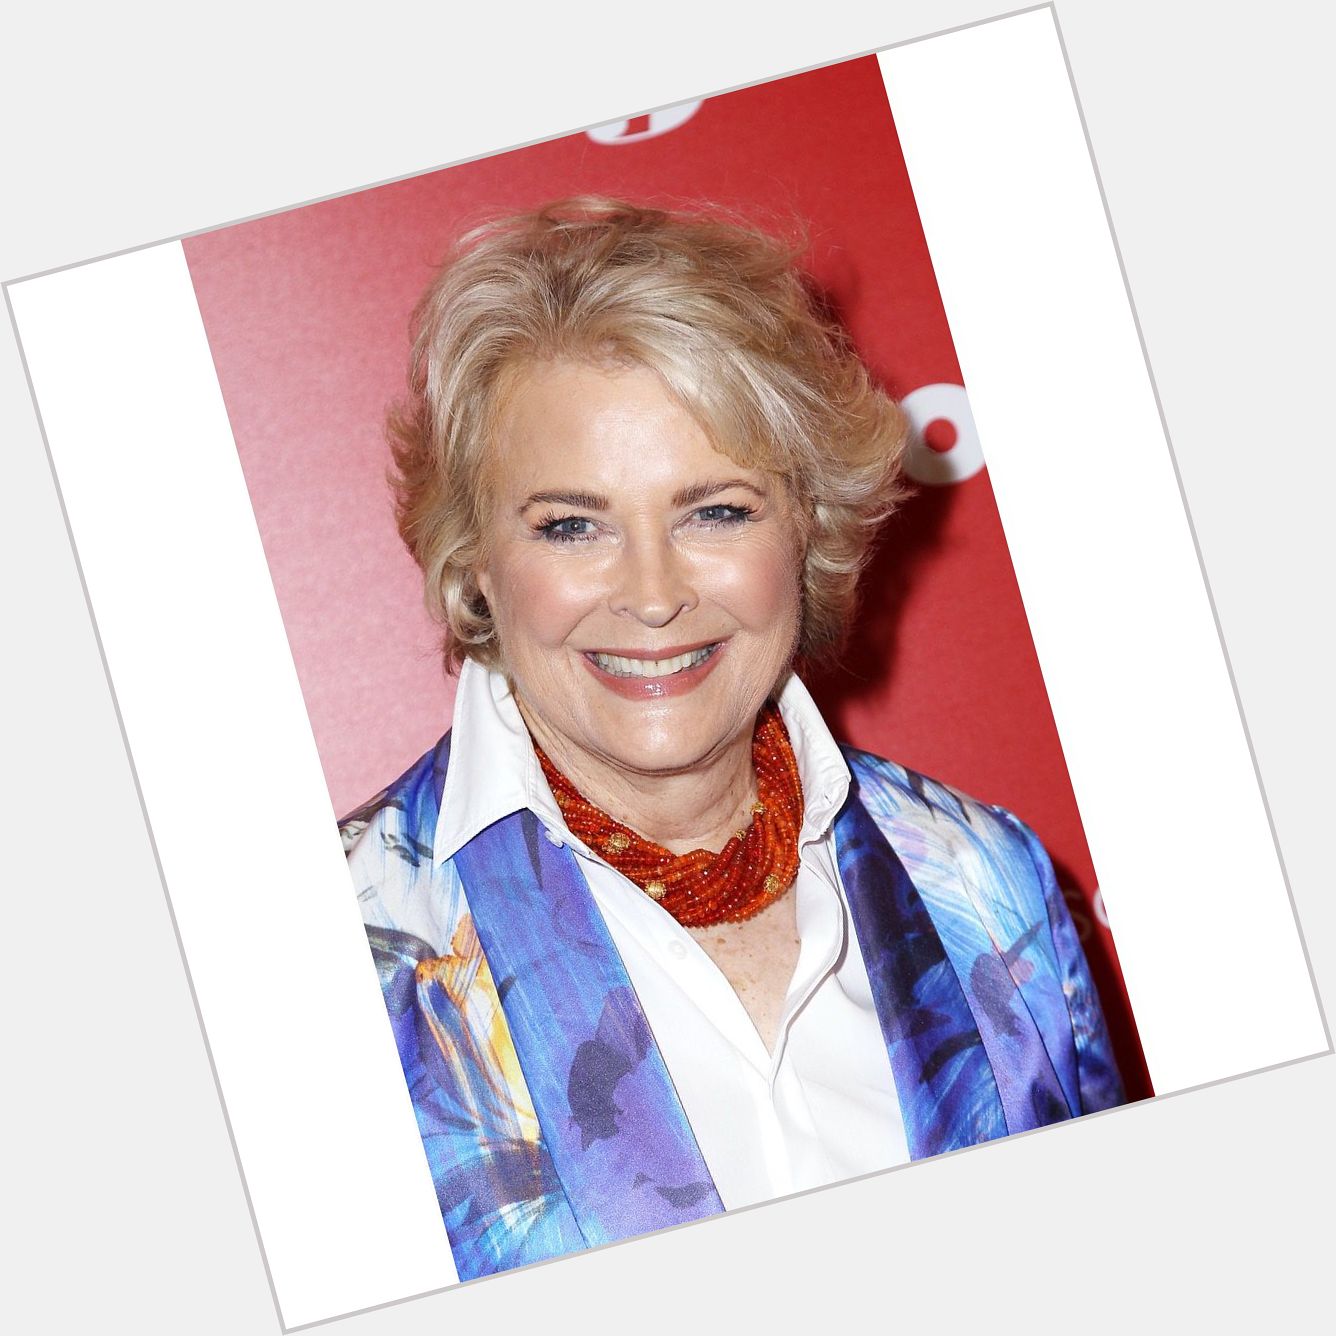 A movie star in and a star in her own right. Happy birthday to Candice Bergen 